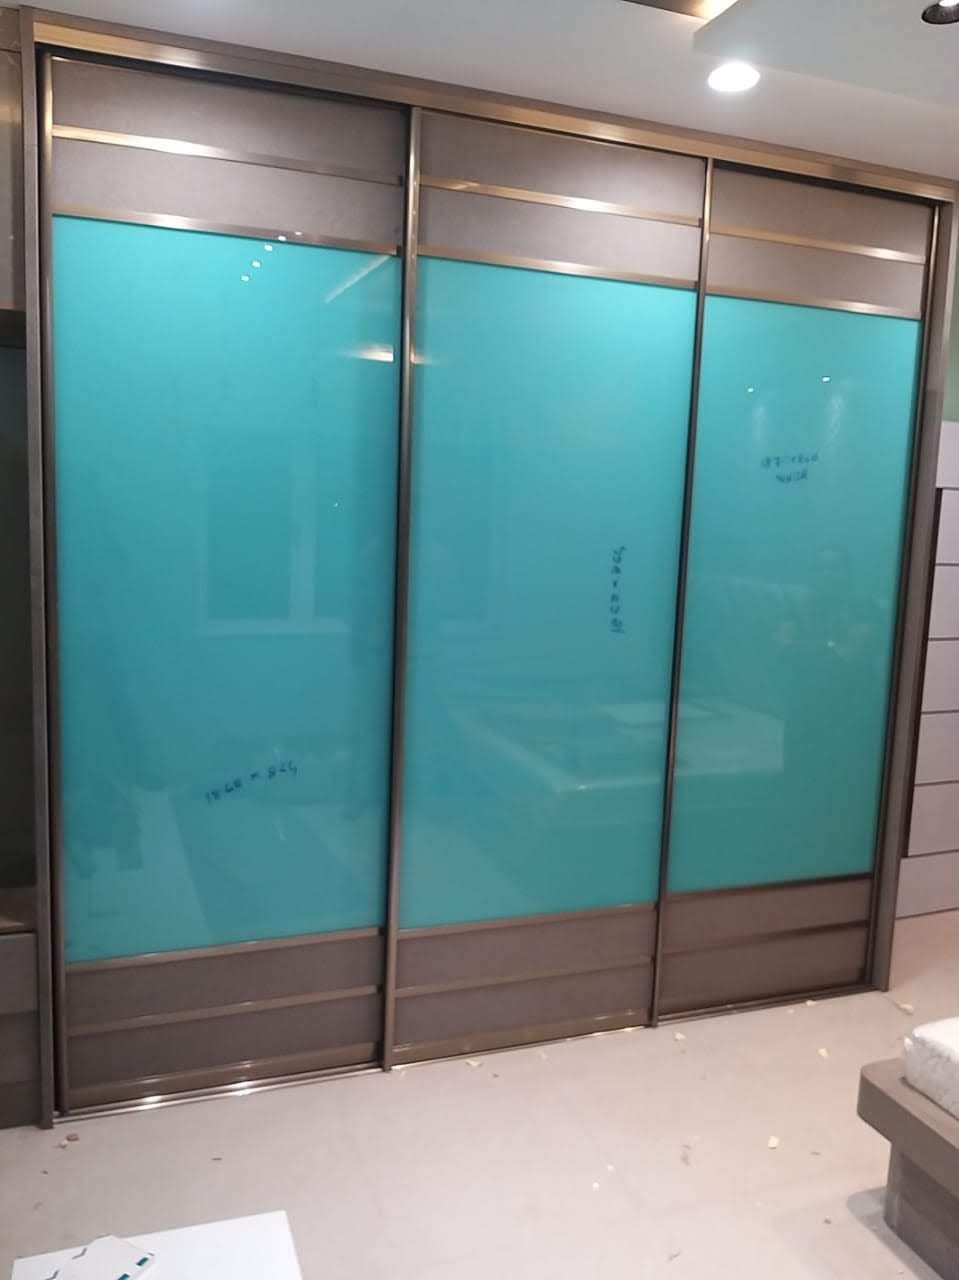 sliding-lacquer-glass-wardrobes-designs-gallery-of-glass-sliding-wardrobes-in-noida-greater-noida-india